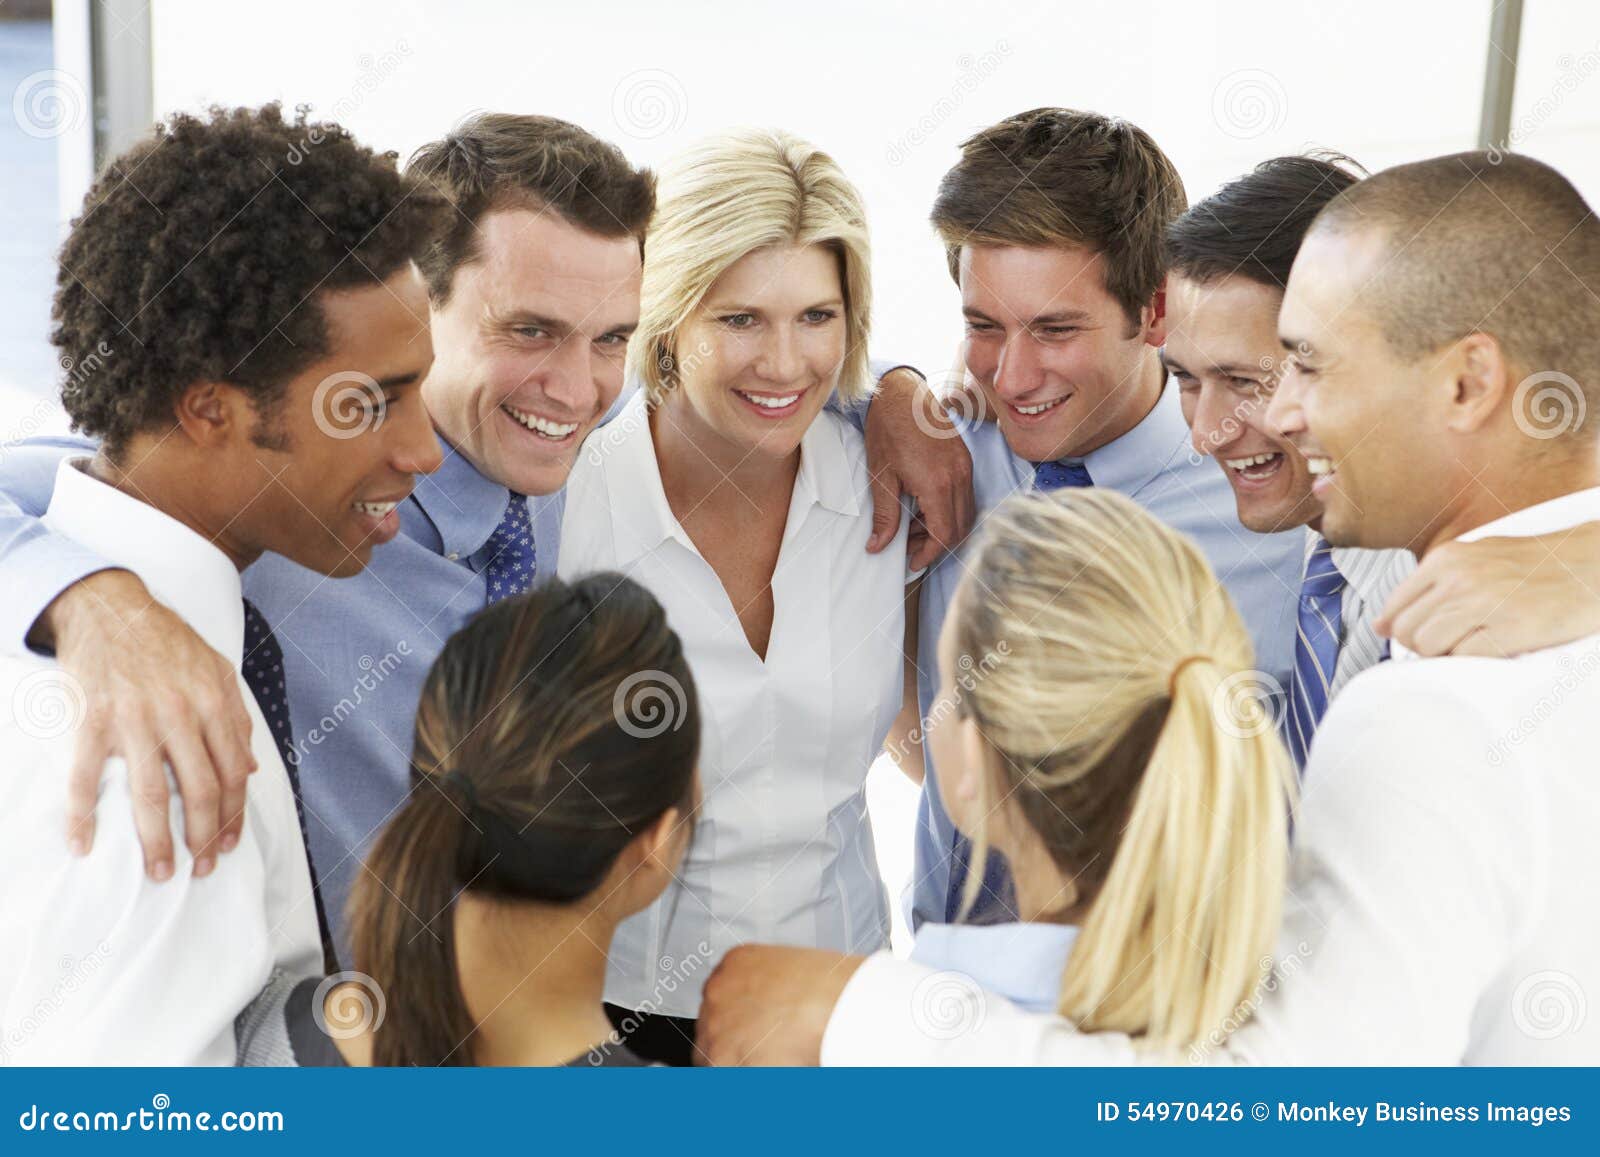 close up of business people congratulating one another in team building exercise